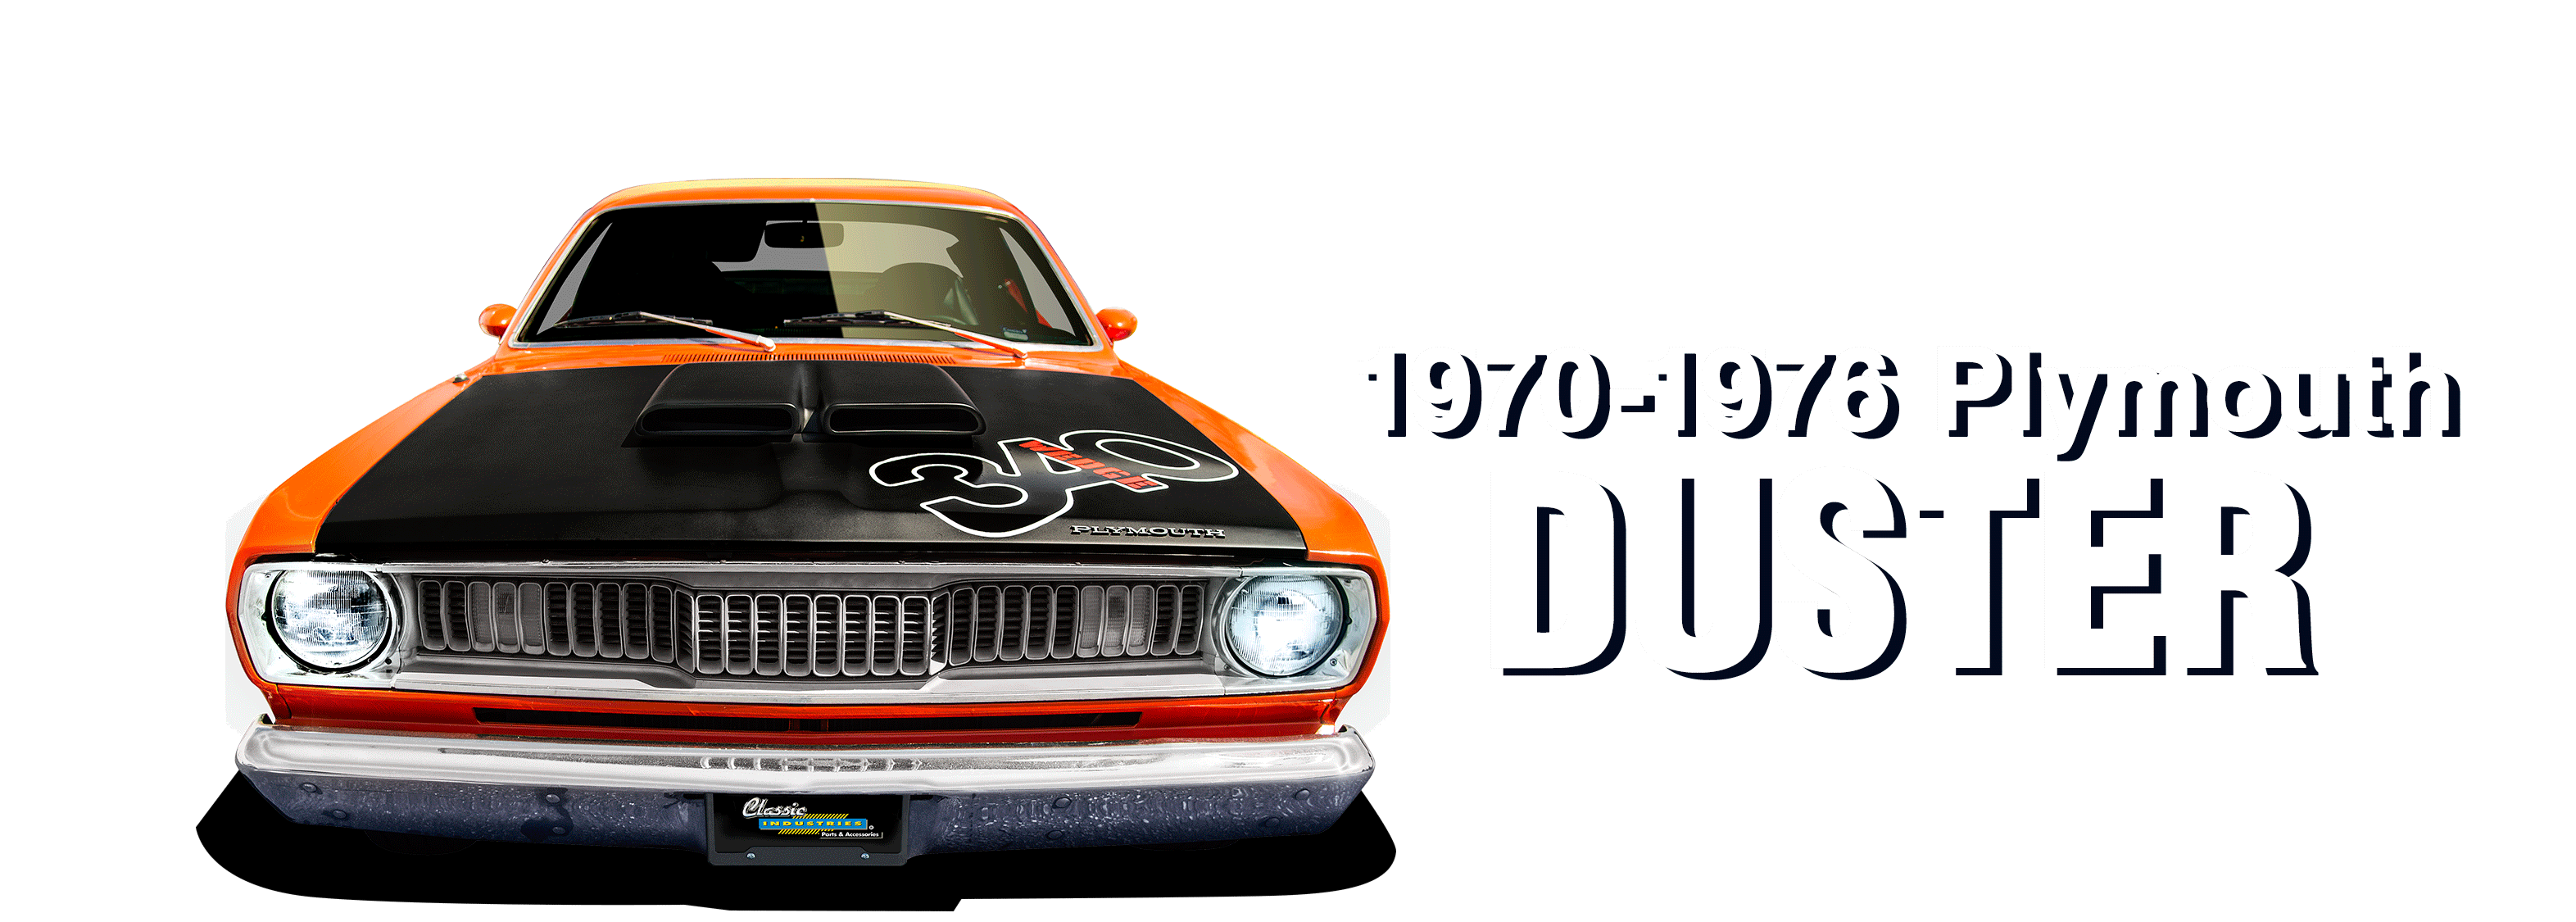 Plymouth-Duster-vehicle-desktop